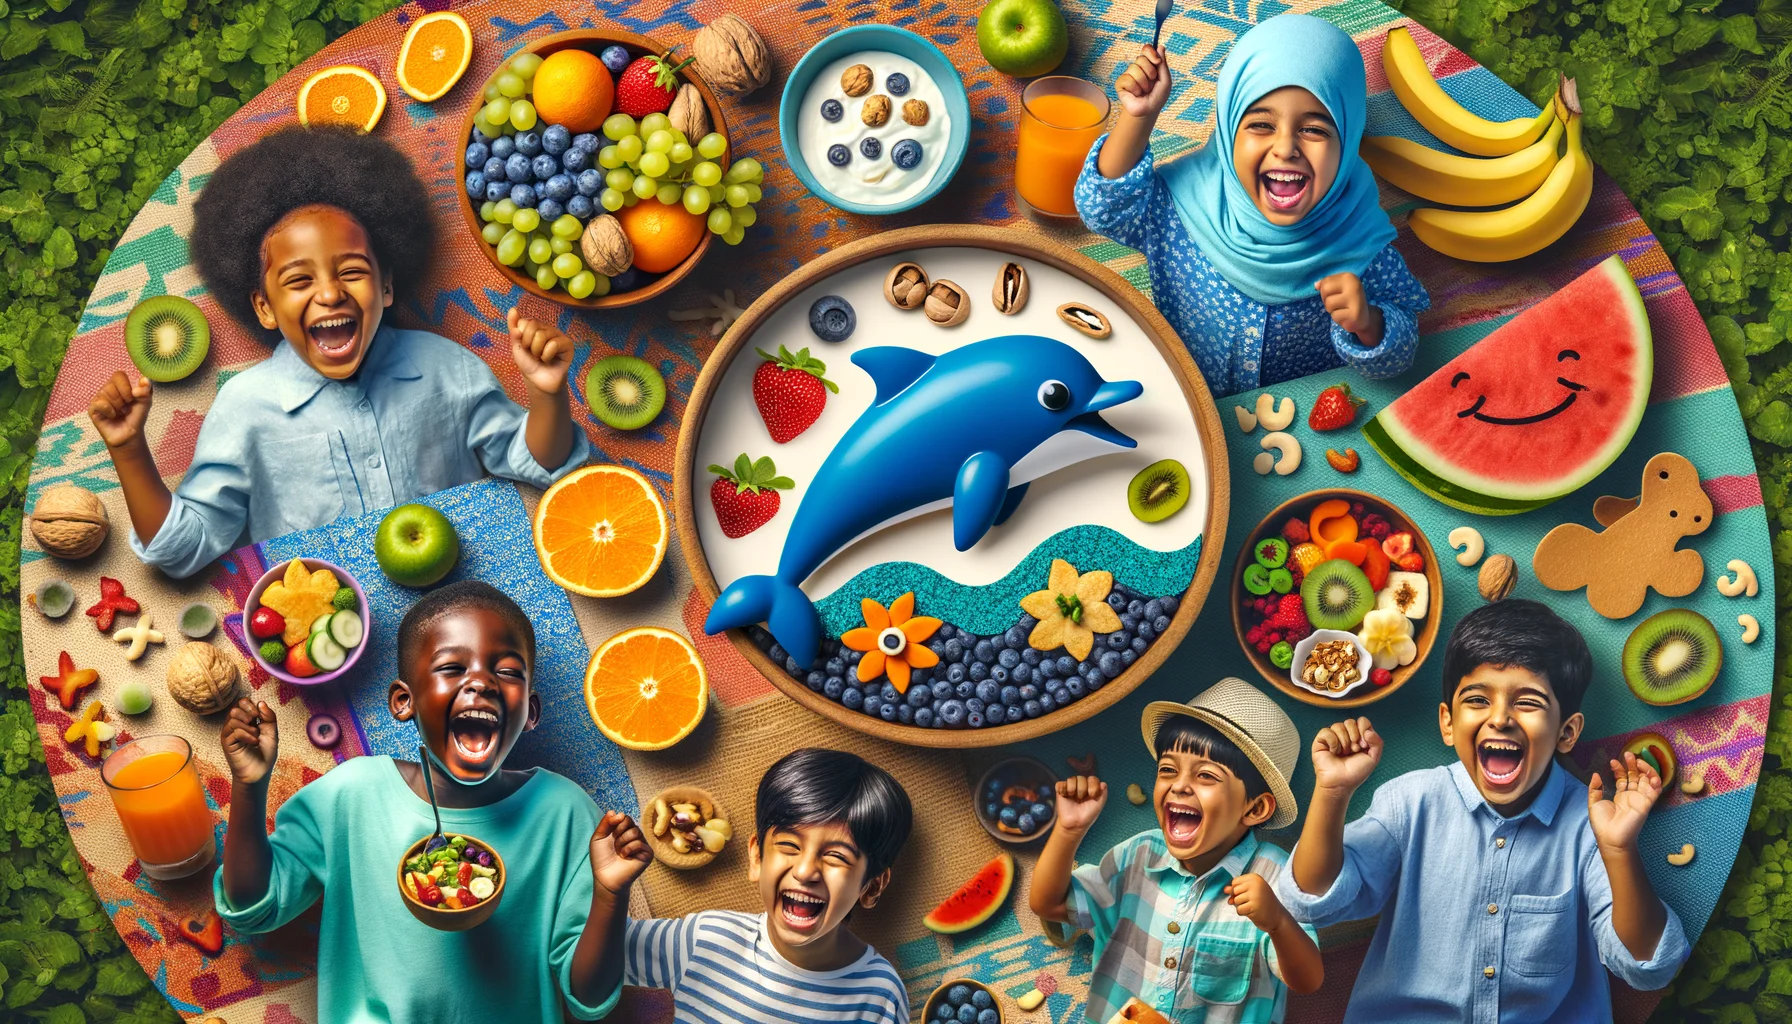 Create a vivid and humorous scene that showcases 'Healthy Snack Alternatives for Kids' in a perfect scenario. The image could feature a group of children of diverse descents such as Hispanic, Caucasian, Middle-Eastern, and South Asian enjoying a fun picnic outdoors. The children are laughing and having a great time while exploring an array of colorful and tantalizing healthy snacks. These snacks could include a variety of fruits, vegetables, nuts, and yogurt. To add a playful twist, some of the snacks could also take playful shapes, like a banana dolphin jumping out of a bowl of blueberry 'ocean', or a watermelon slice turned into a funny face with fruits and veggies.